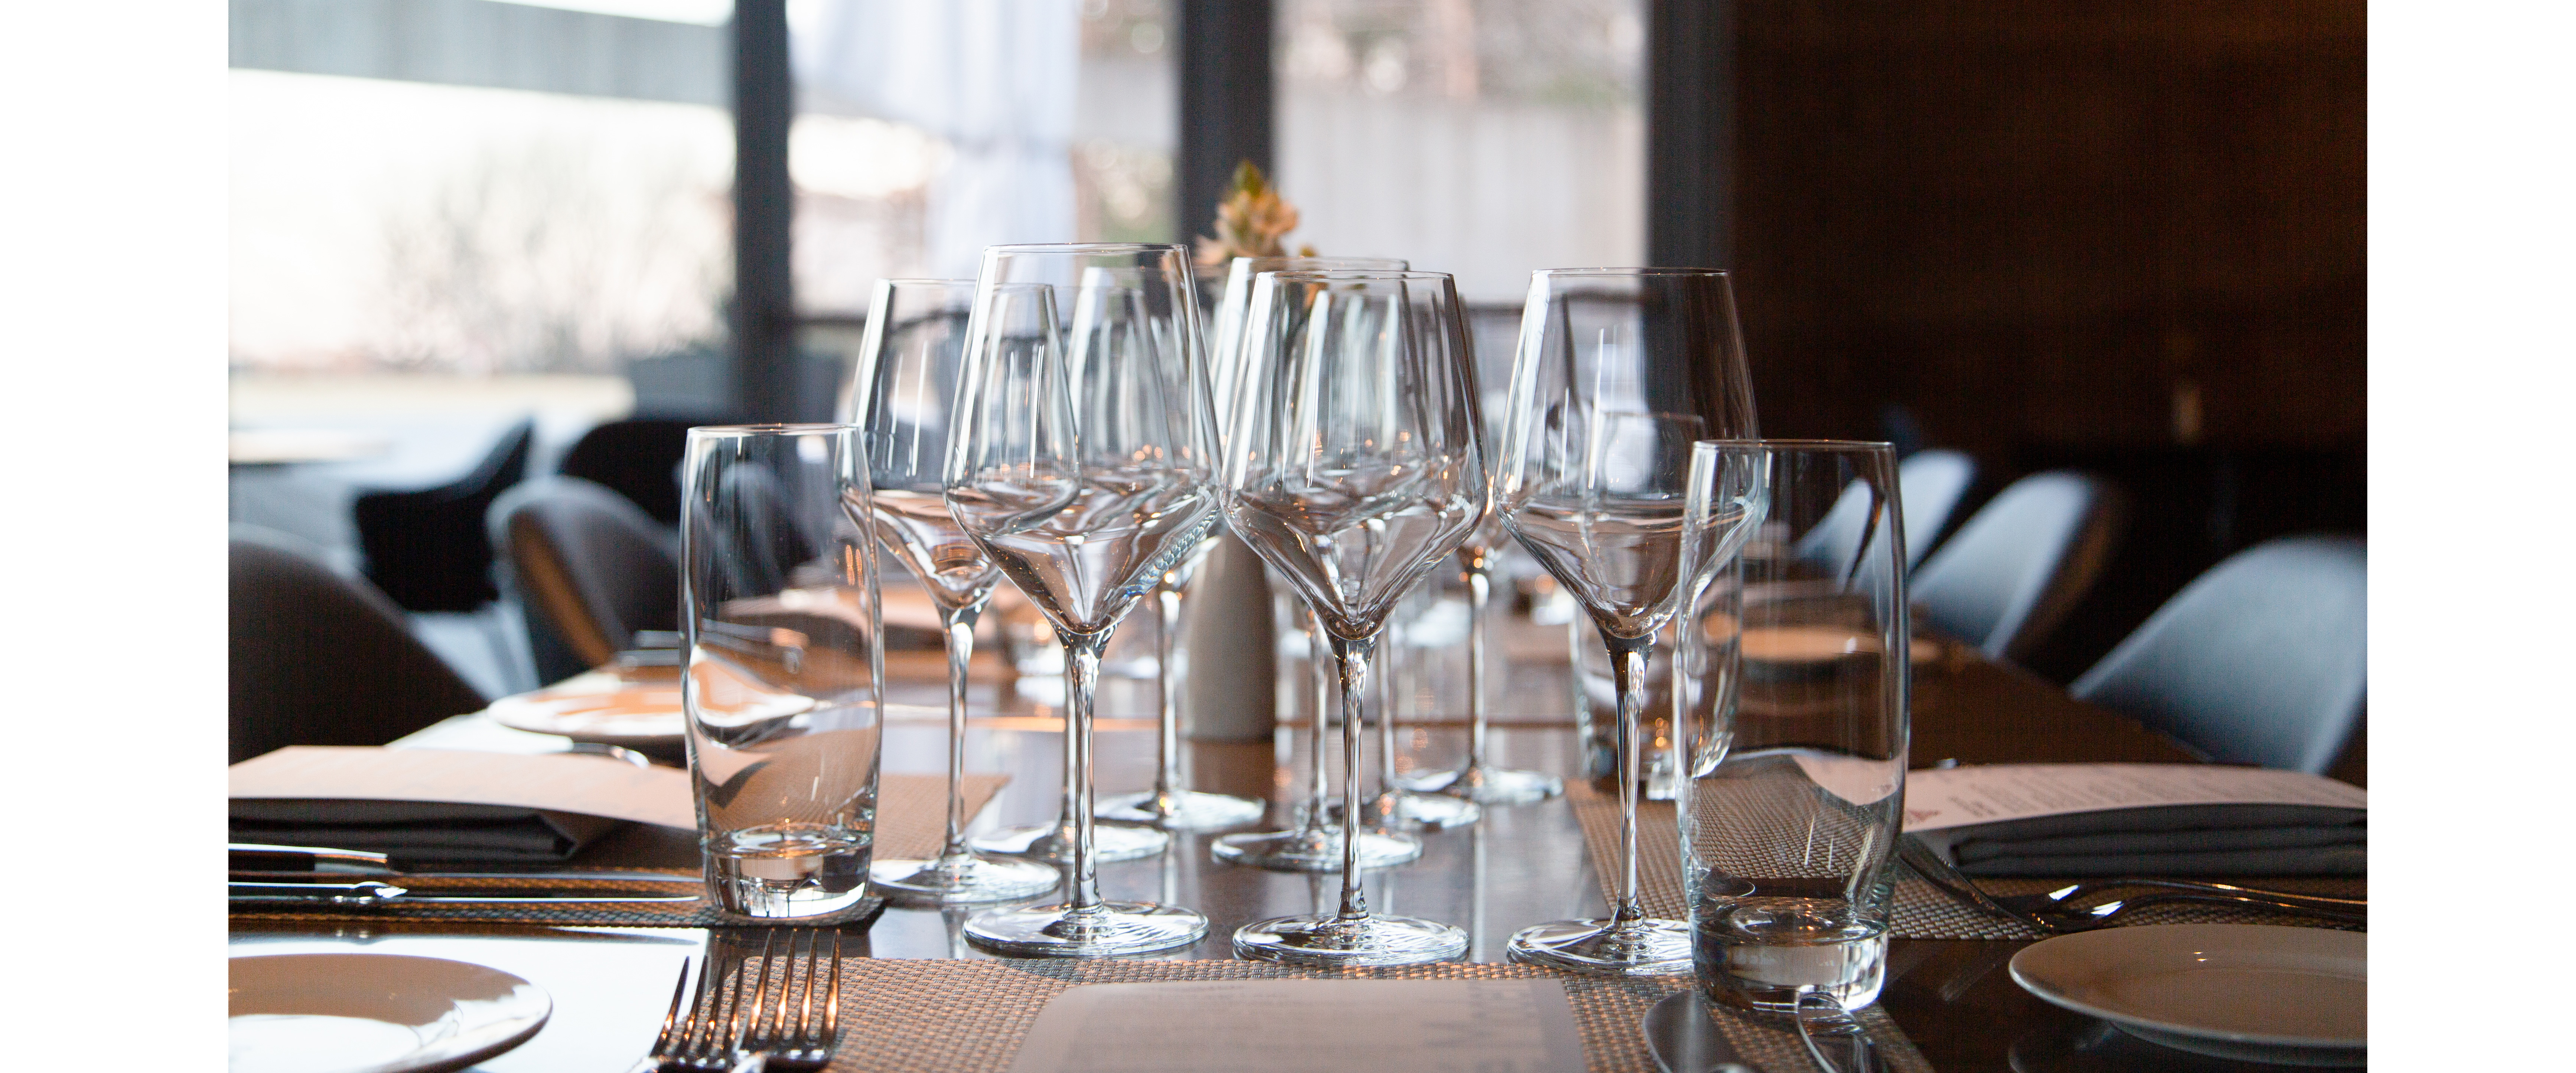 table_set_with_wine_glasses